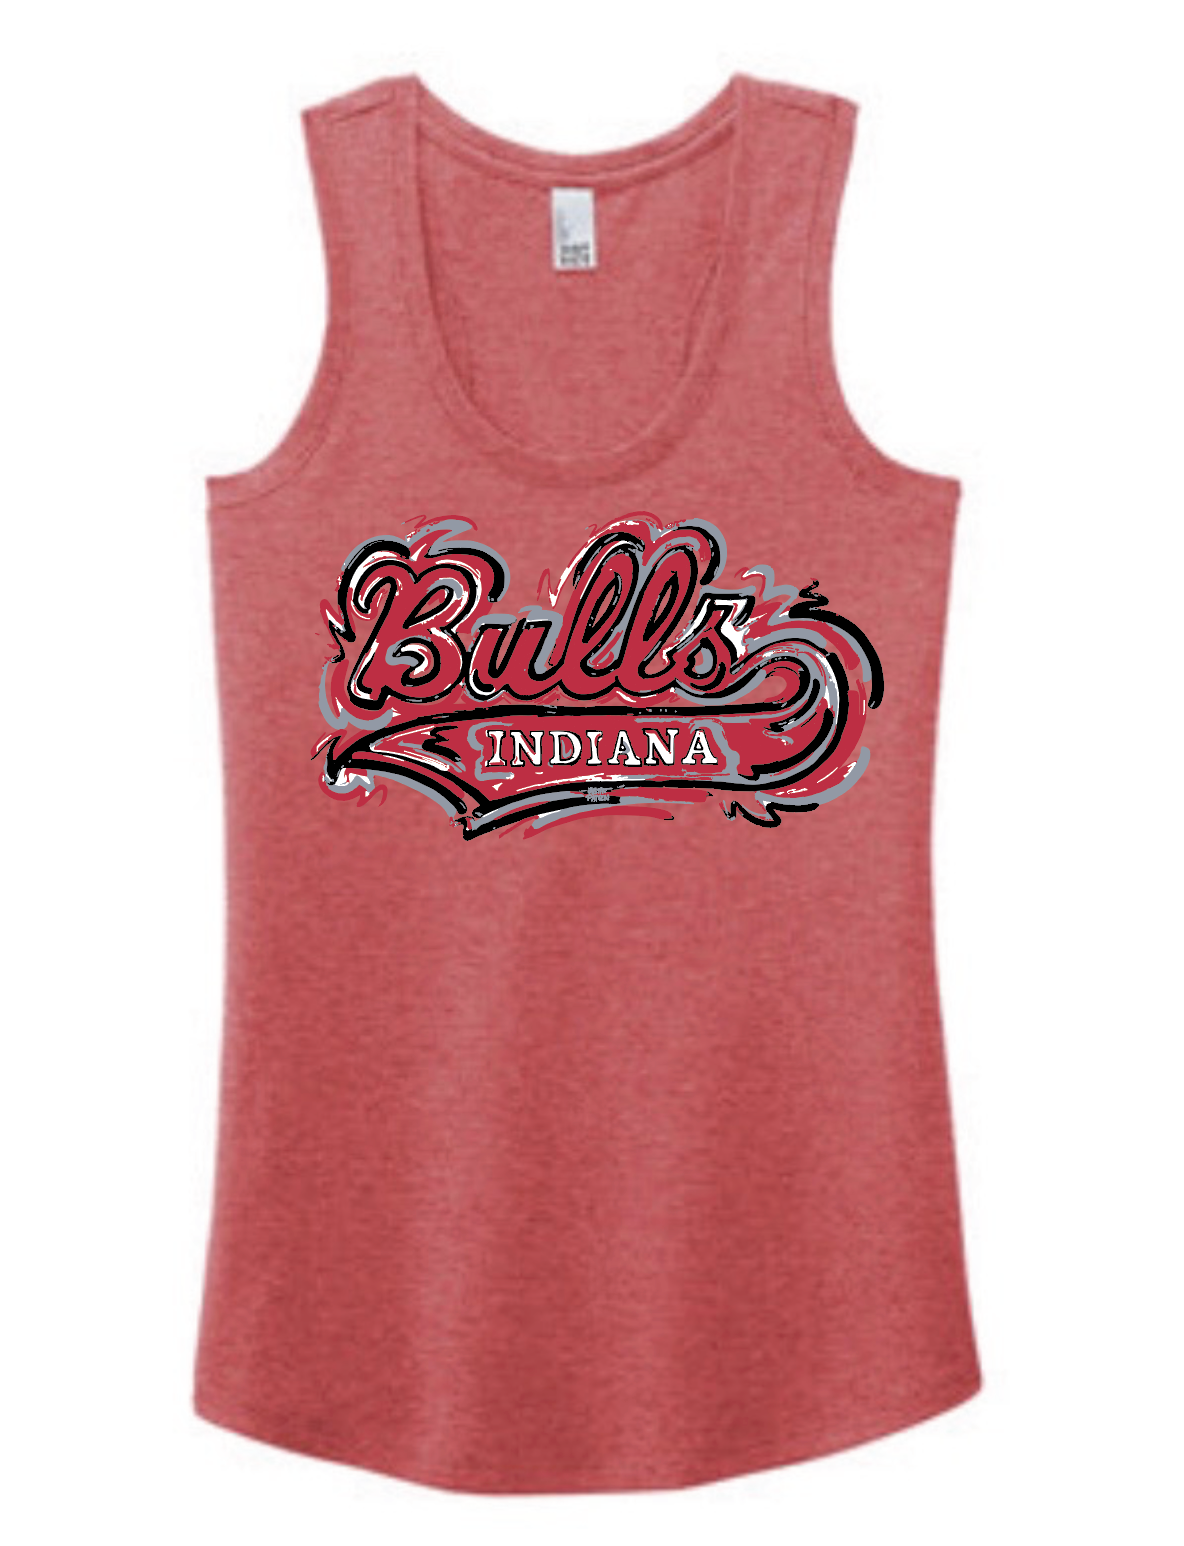 Indiana Bulls Tank by Justin Patten (2 Colors)